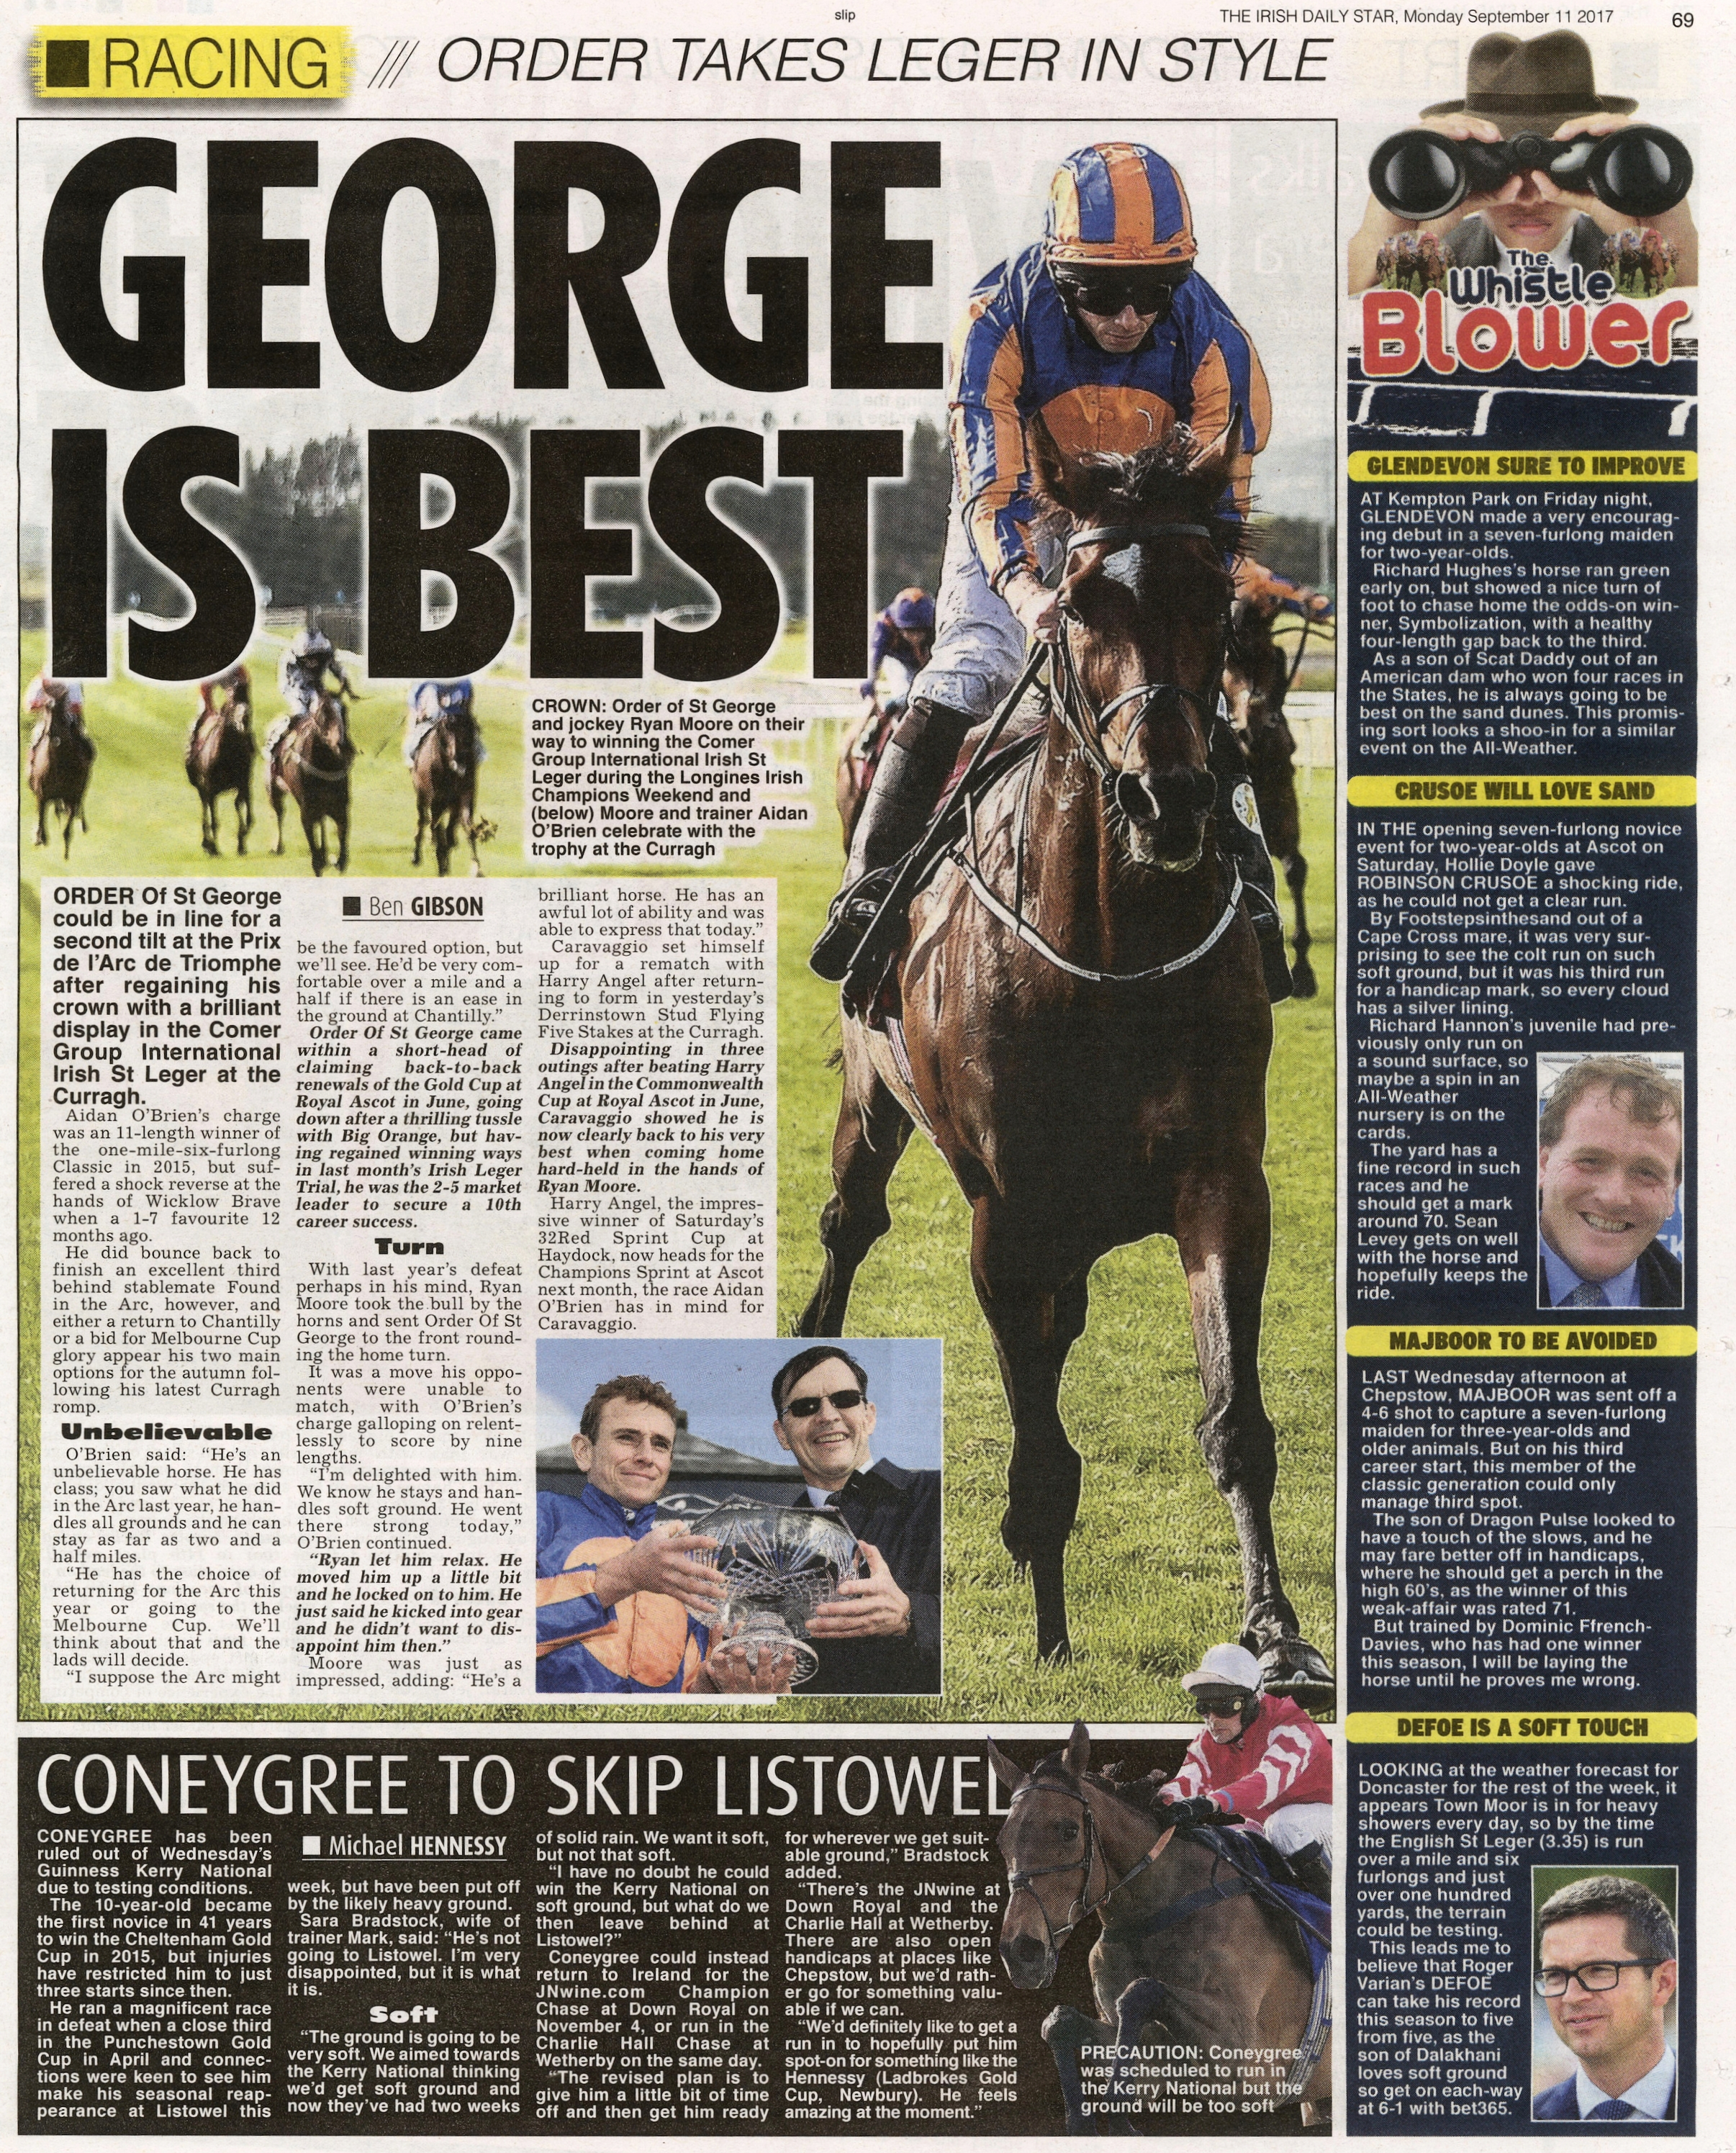  Order of St George with Ryan Moore up win the Irish St Leger at The Curragh September 11 2017  The Irish Daily Star  